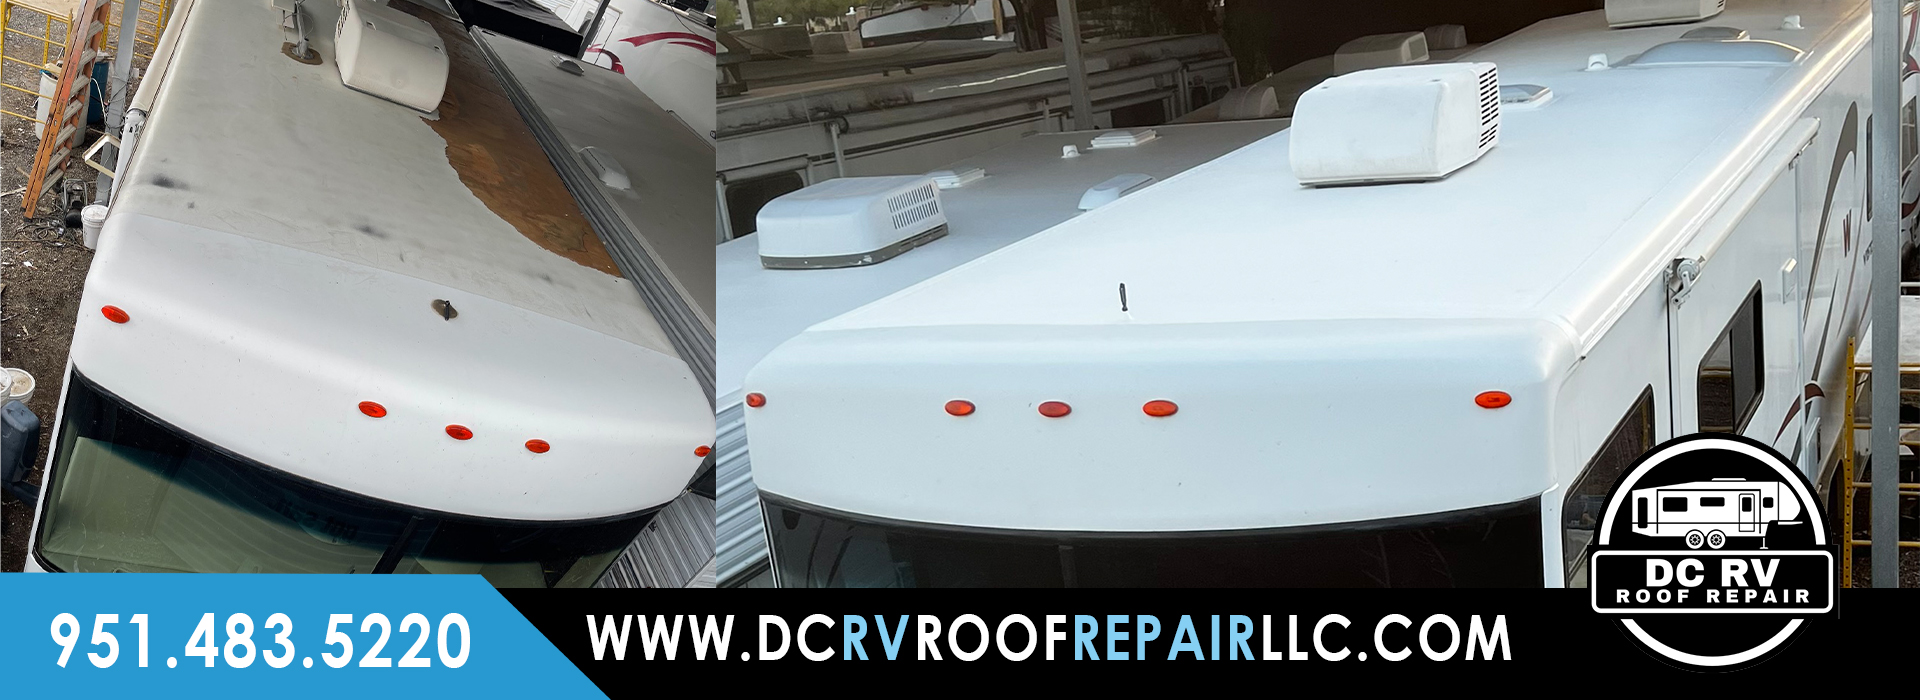 Need to replace your rv roof call us DC RV Roof Repair